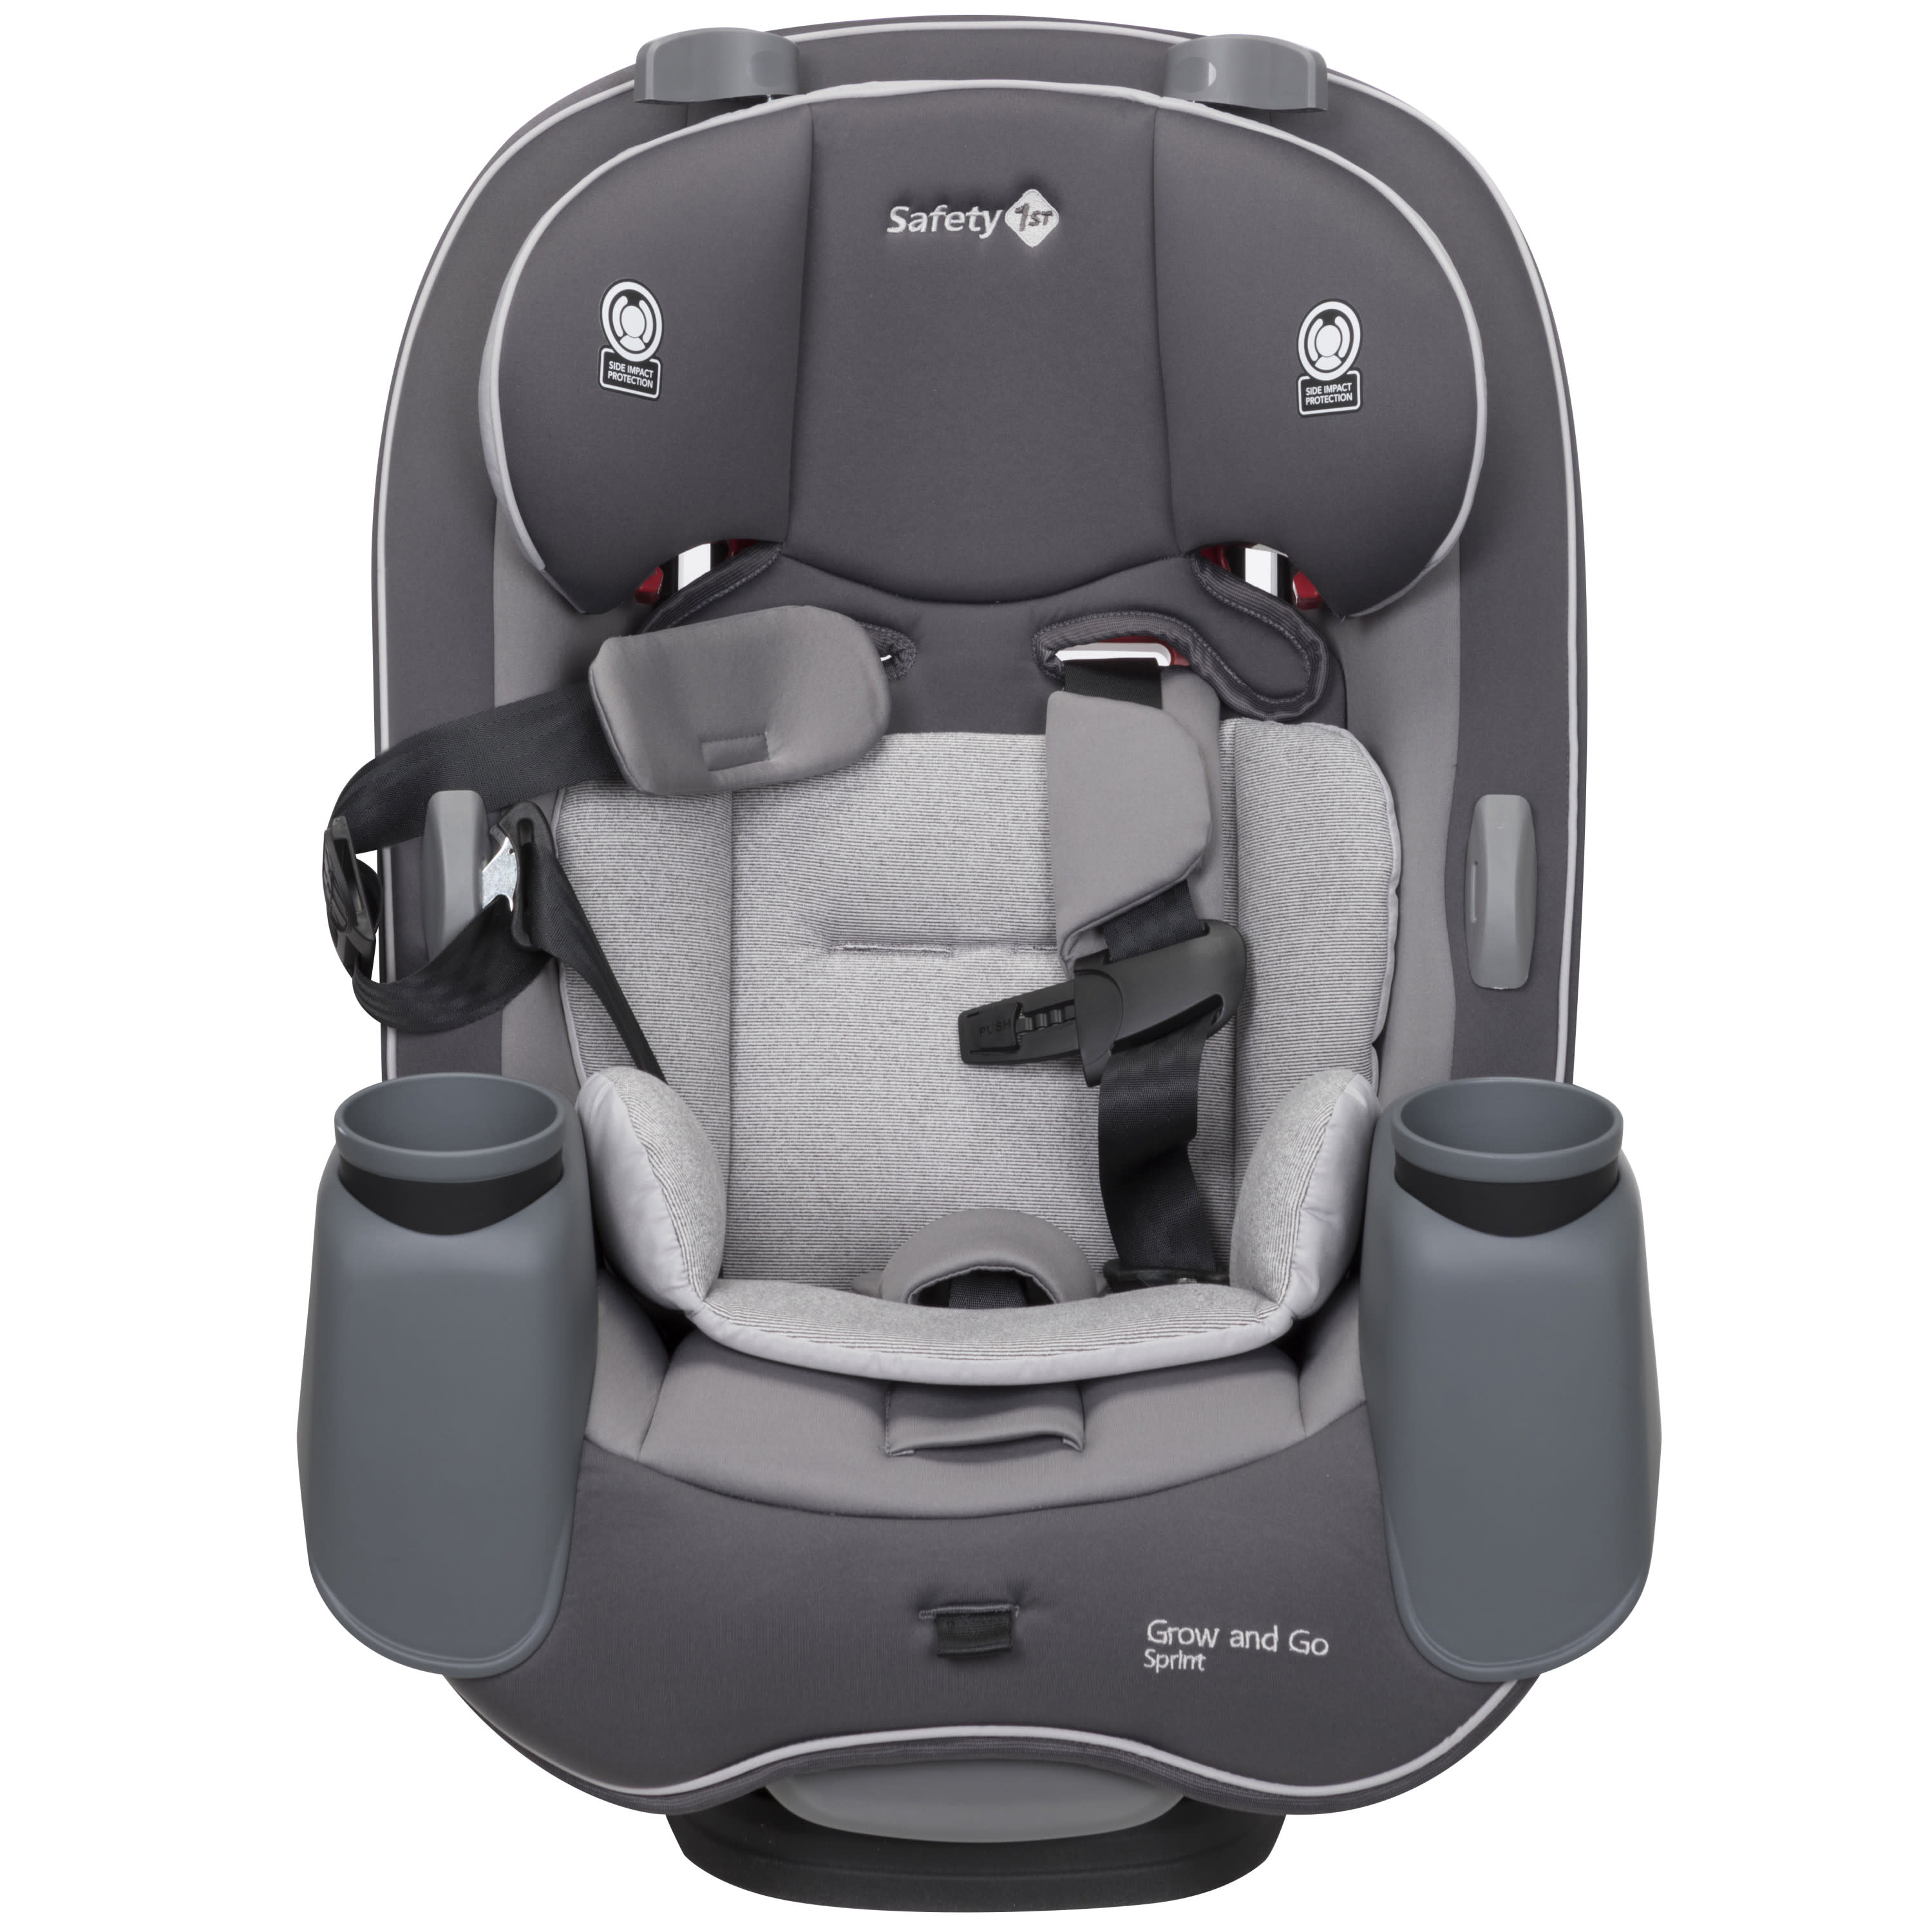 Safety 1st Grow and Go Sprint All-in-1 Convertible Car Seat, Silver Lake - image 5 of 26